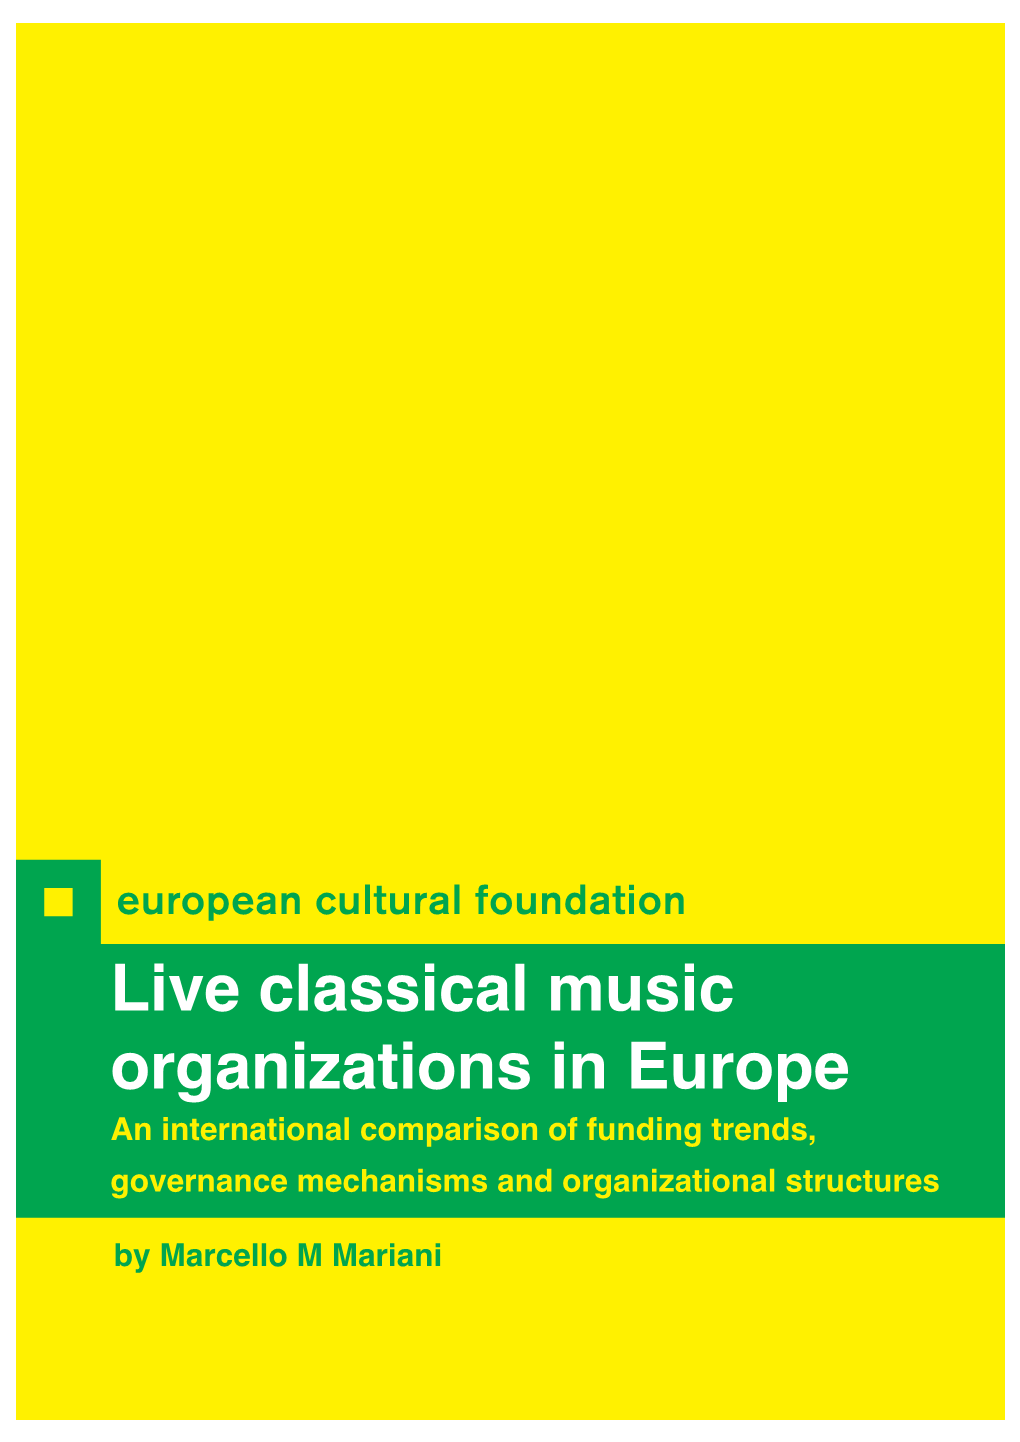 Live Classical Music Organizations in Europe an International Comparison of Funding Trends, Governance Mechanisms and Organizational Structures by Marcello M Mariani